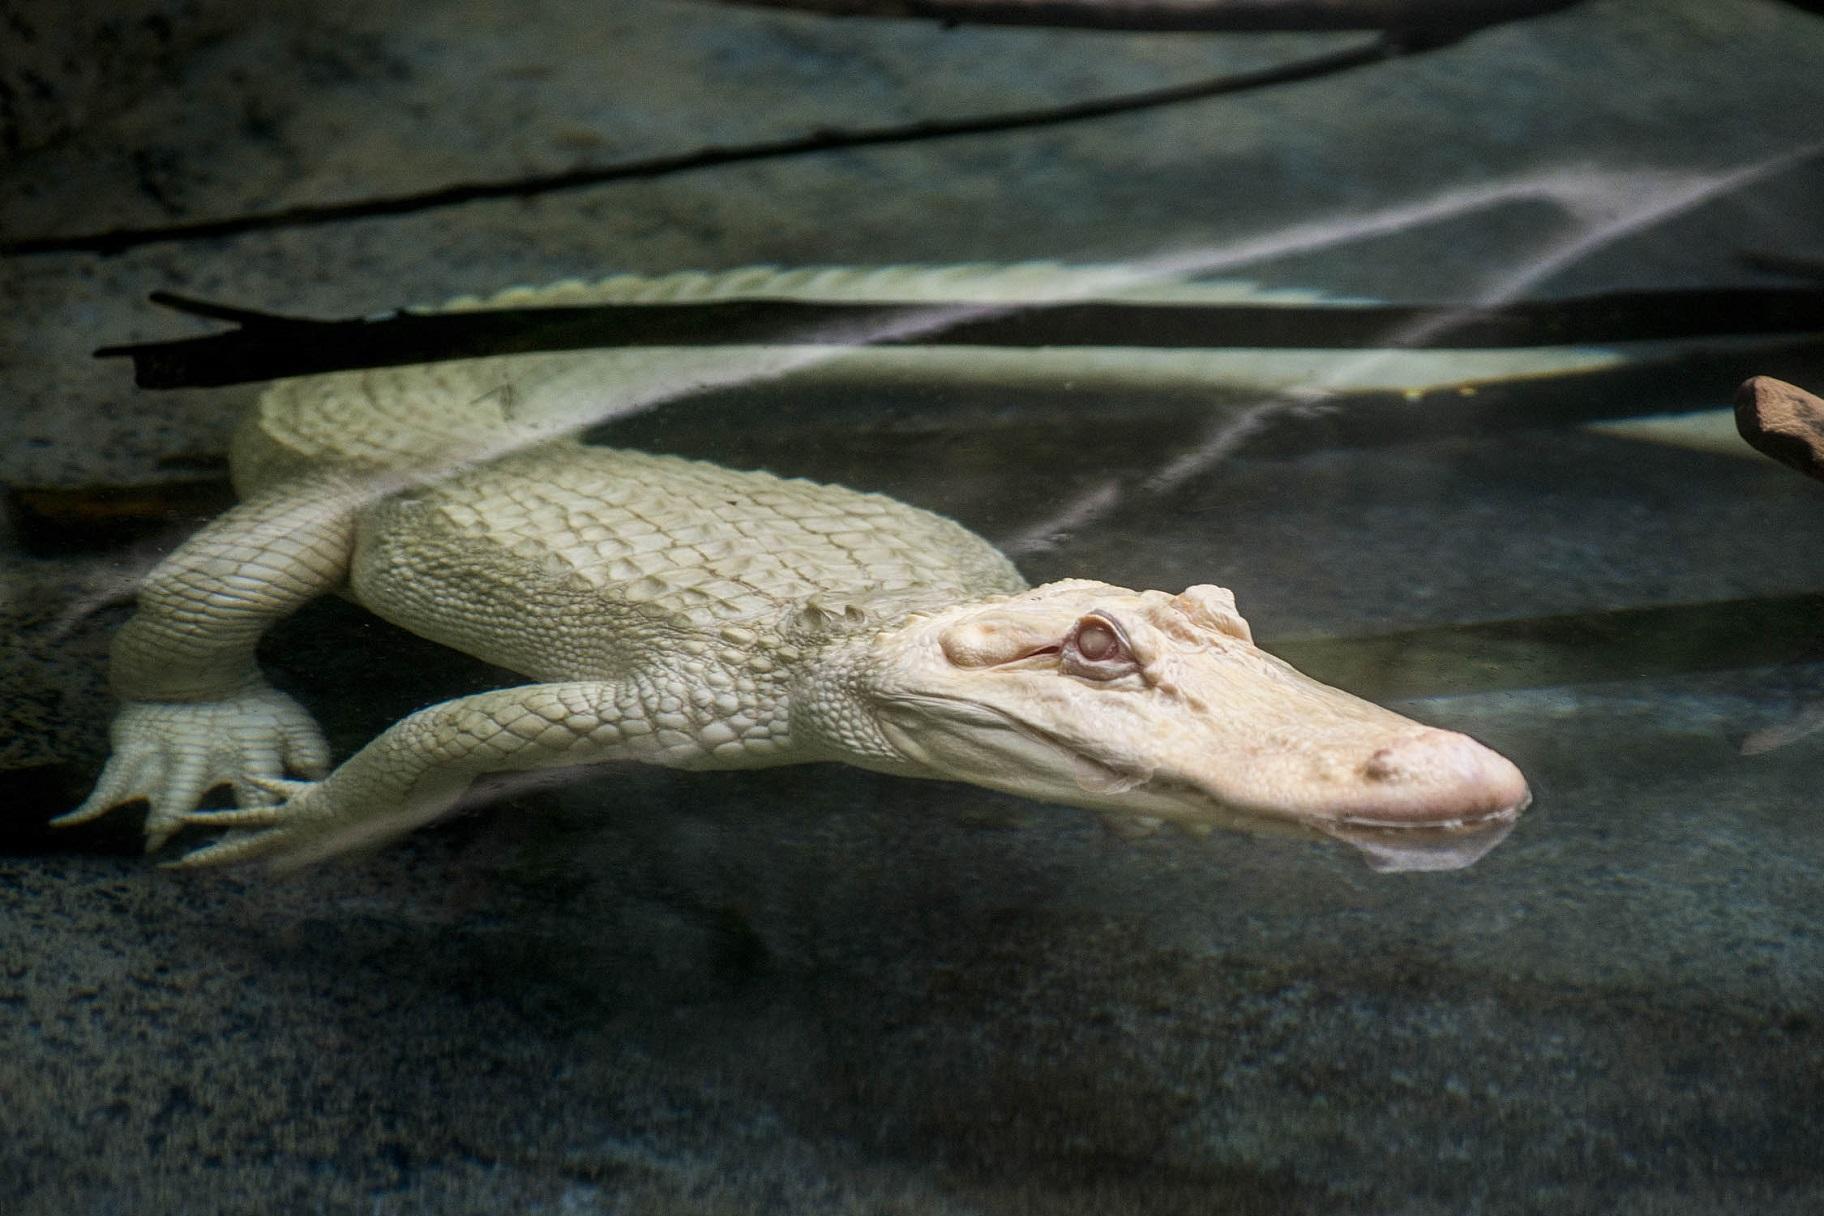 Snowflake, a 7-foot-long albino American alligator, will reside at Brookfield Zoo through September. (Kelly Tone / Chicago Zoological Society) 